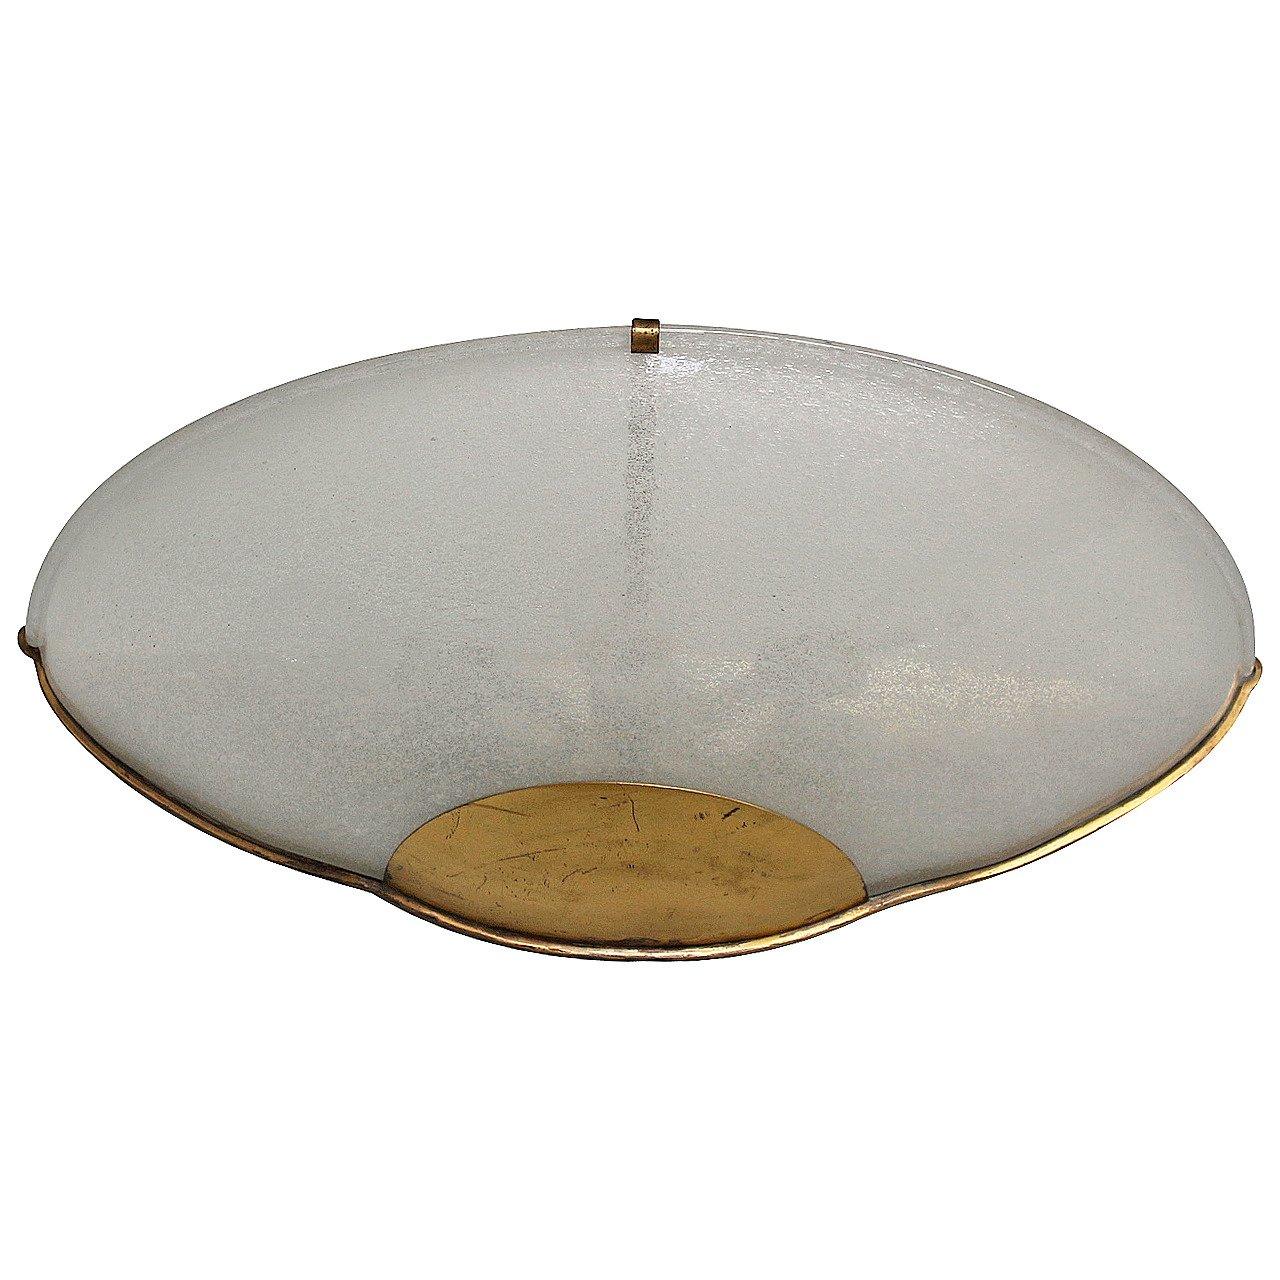 Large Murano glass shade on a gilded metal support sconce.
Dealer Ref: 1160